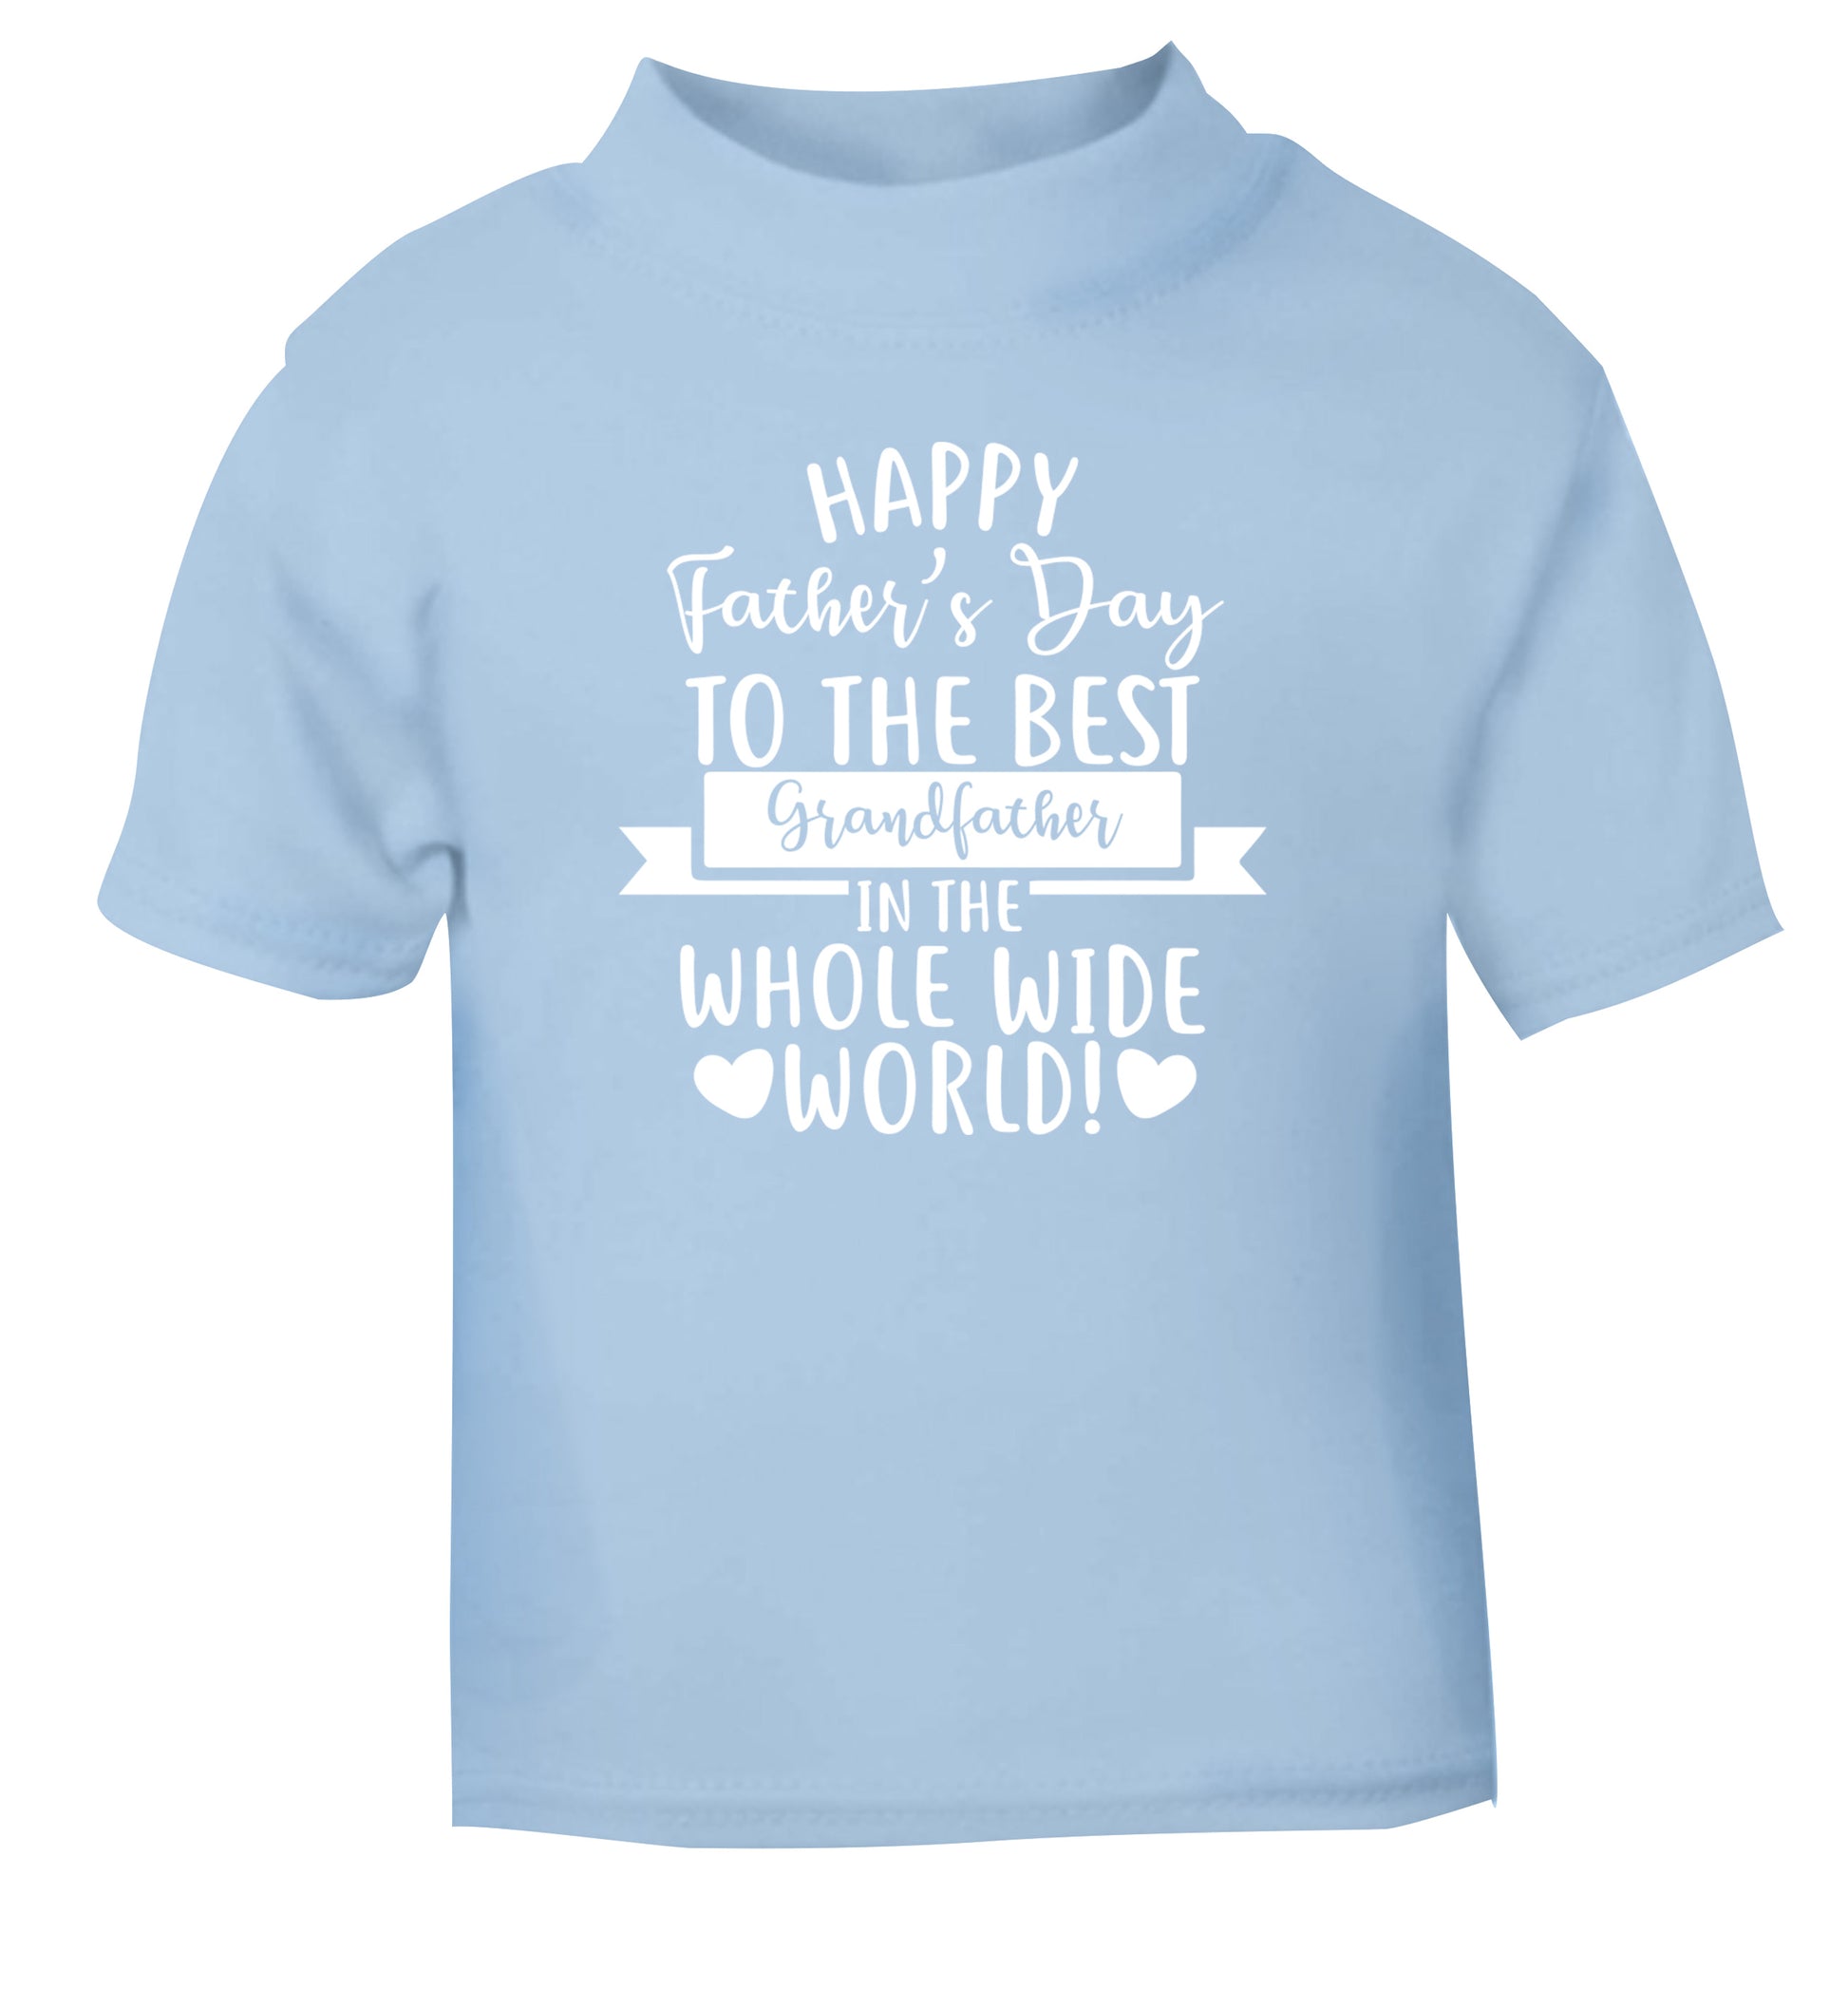 Happy Father's Day to the best grandfather in the world light blue Baby Toddler Tshirt 2 Years